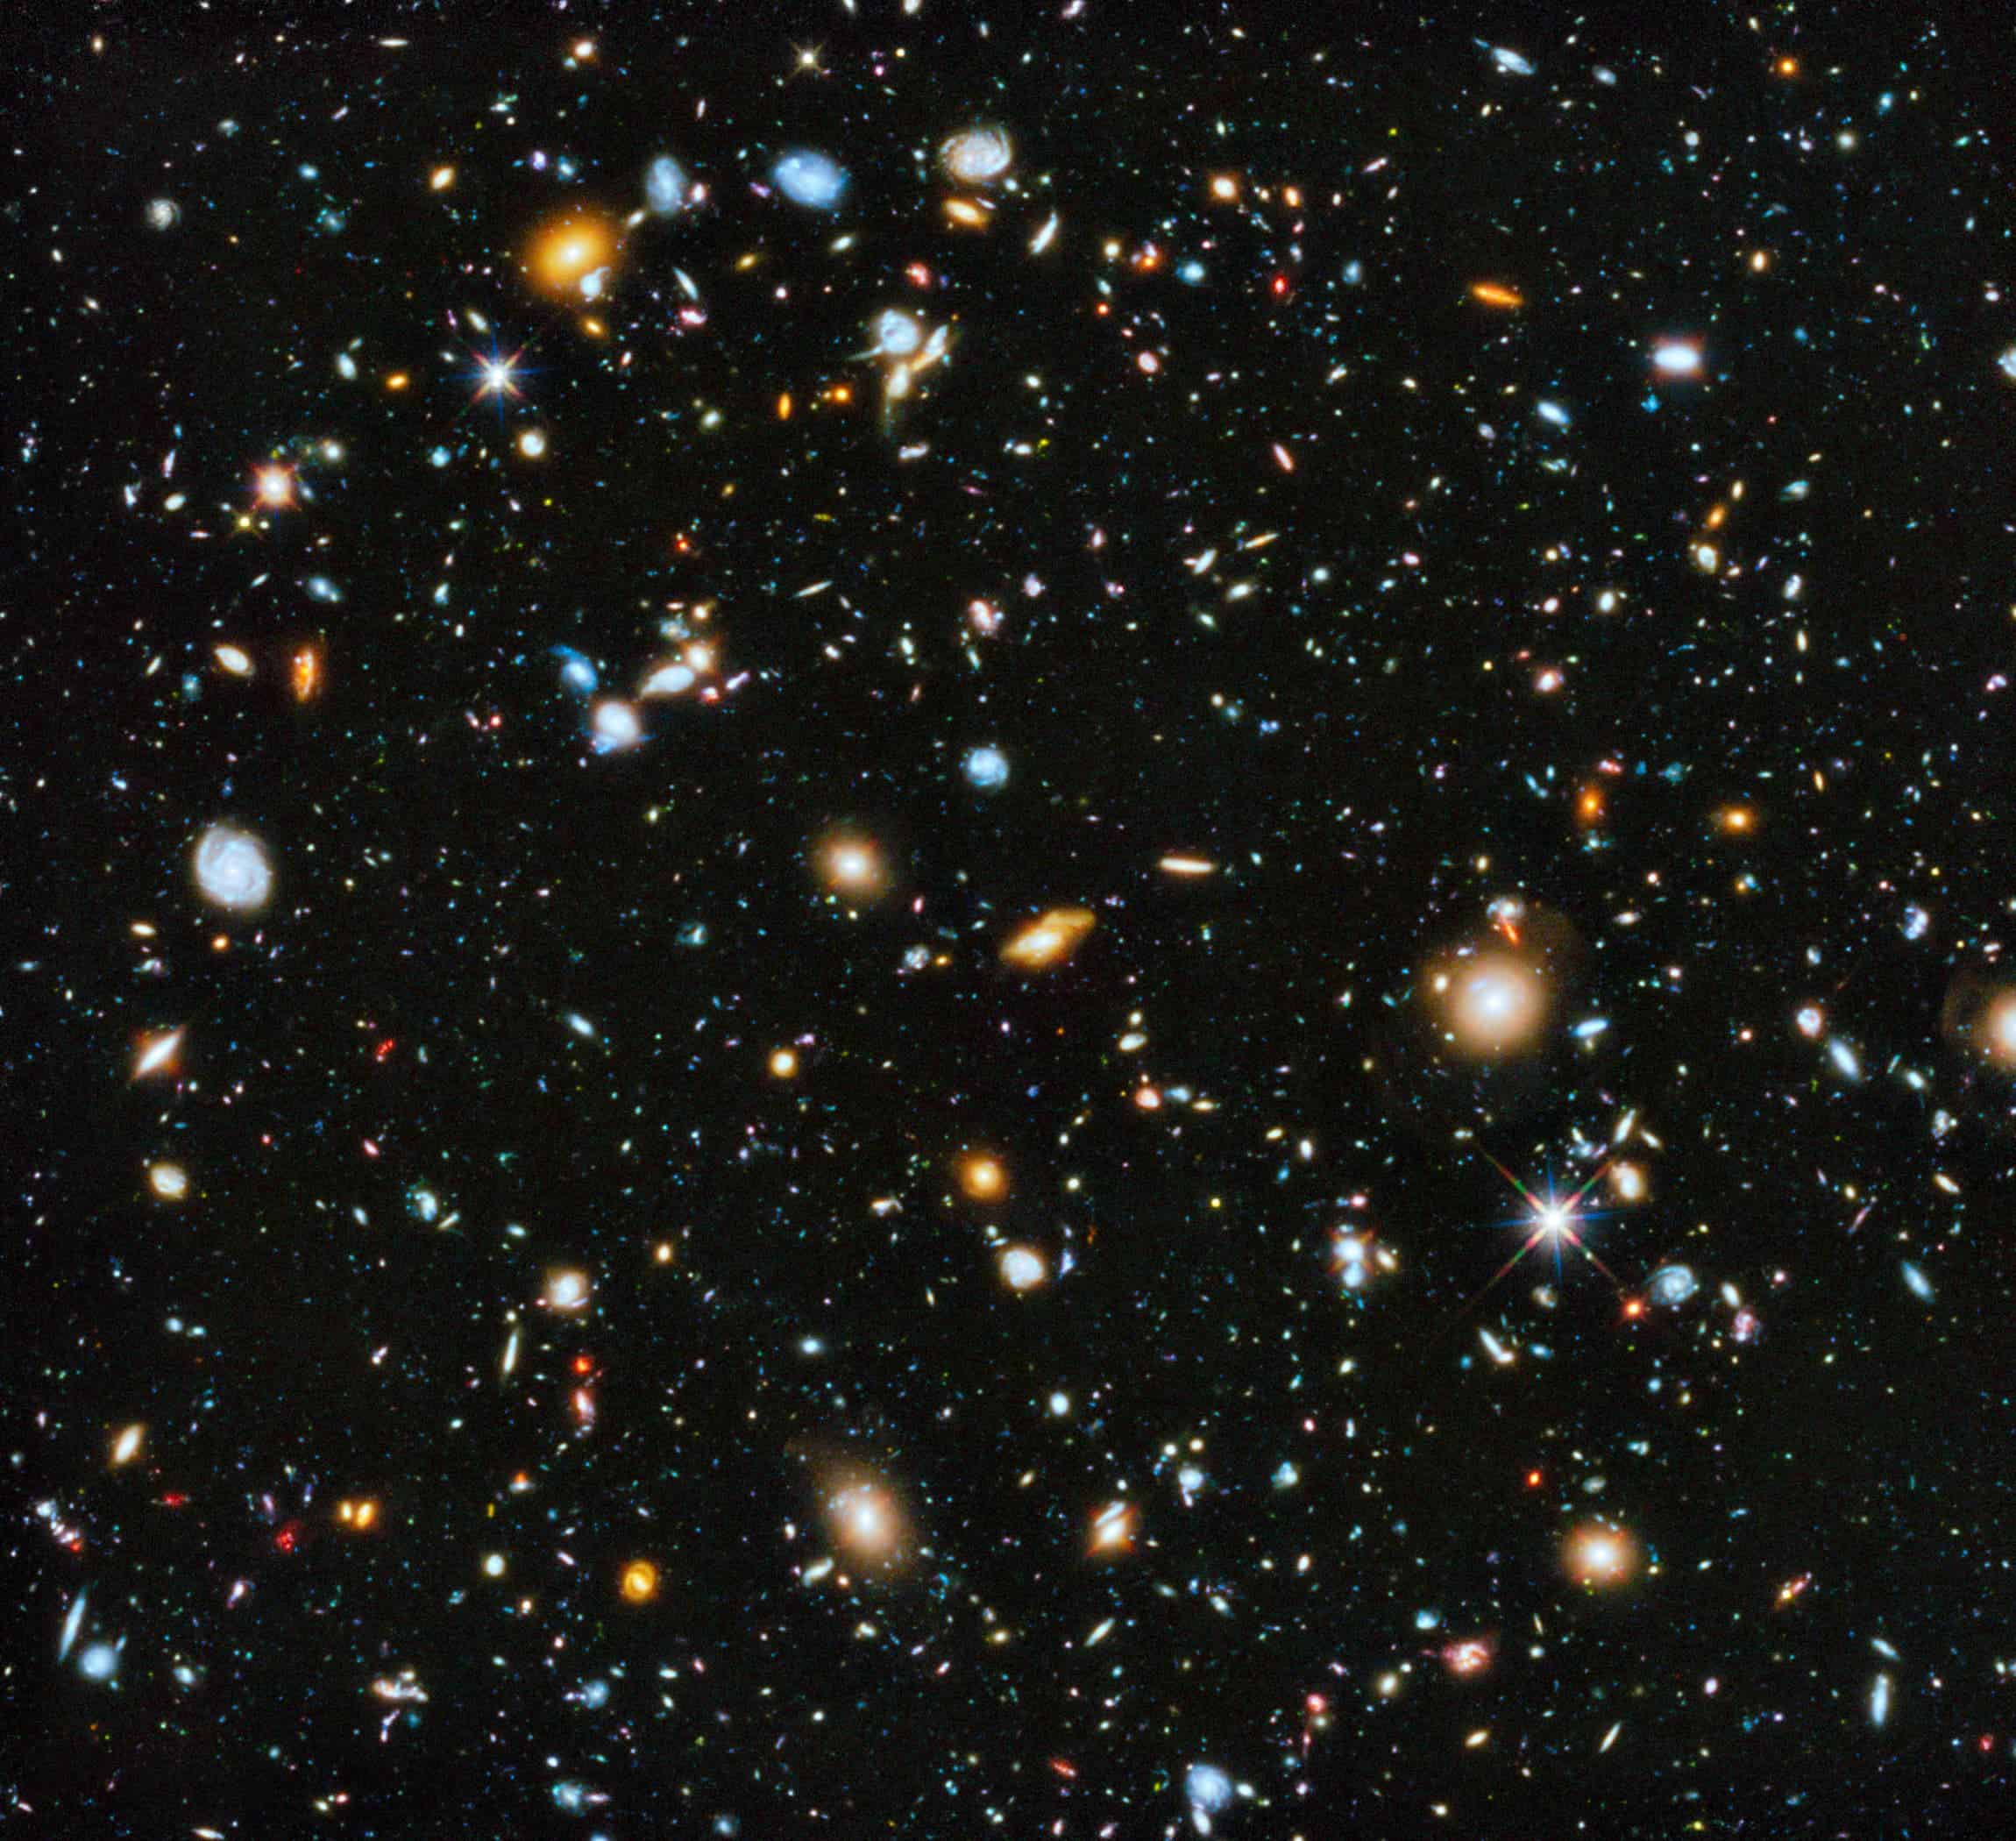 The universe is a weird place and it just got a bit weirder. Image credits: NASA / Hubble.